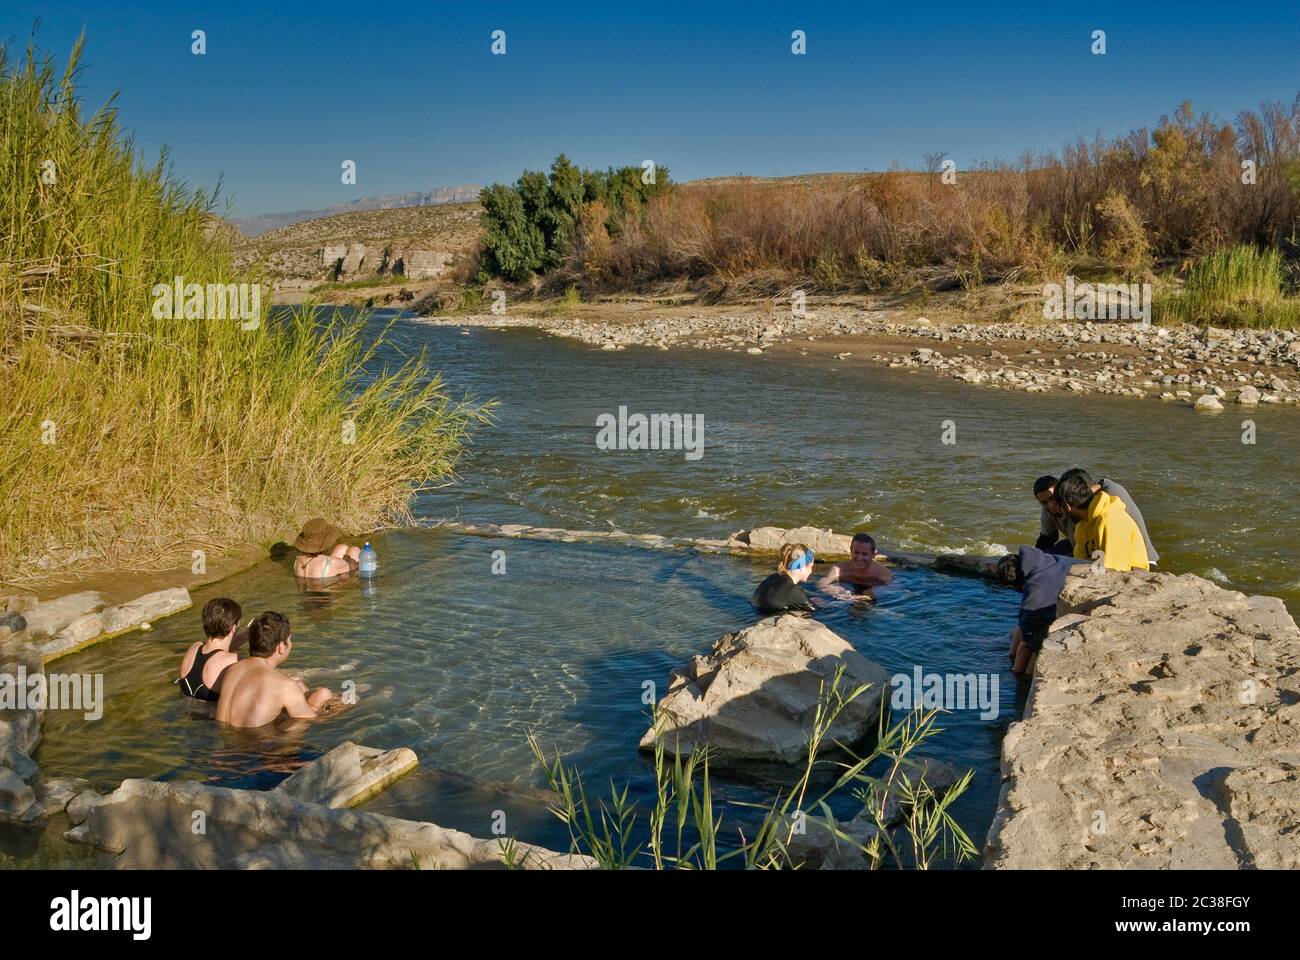 Visitors at Hot Springs water pool on the edge of Rio Grande, Chihuahuan Desert in Big Bend National Park, Texas, USA Stock Photo